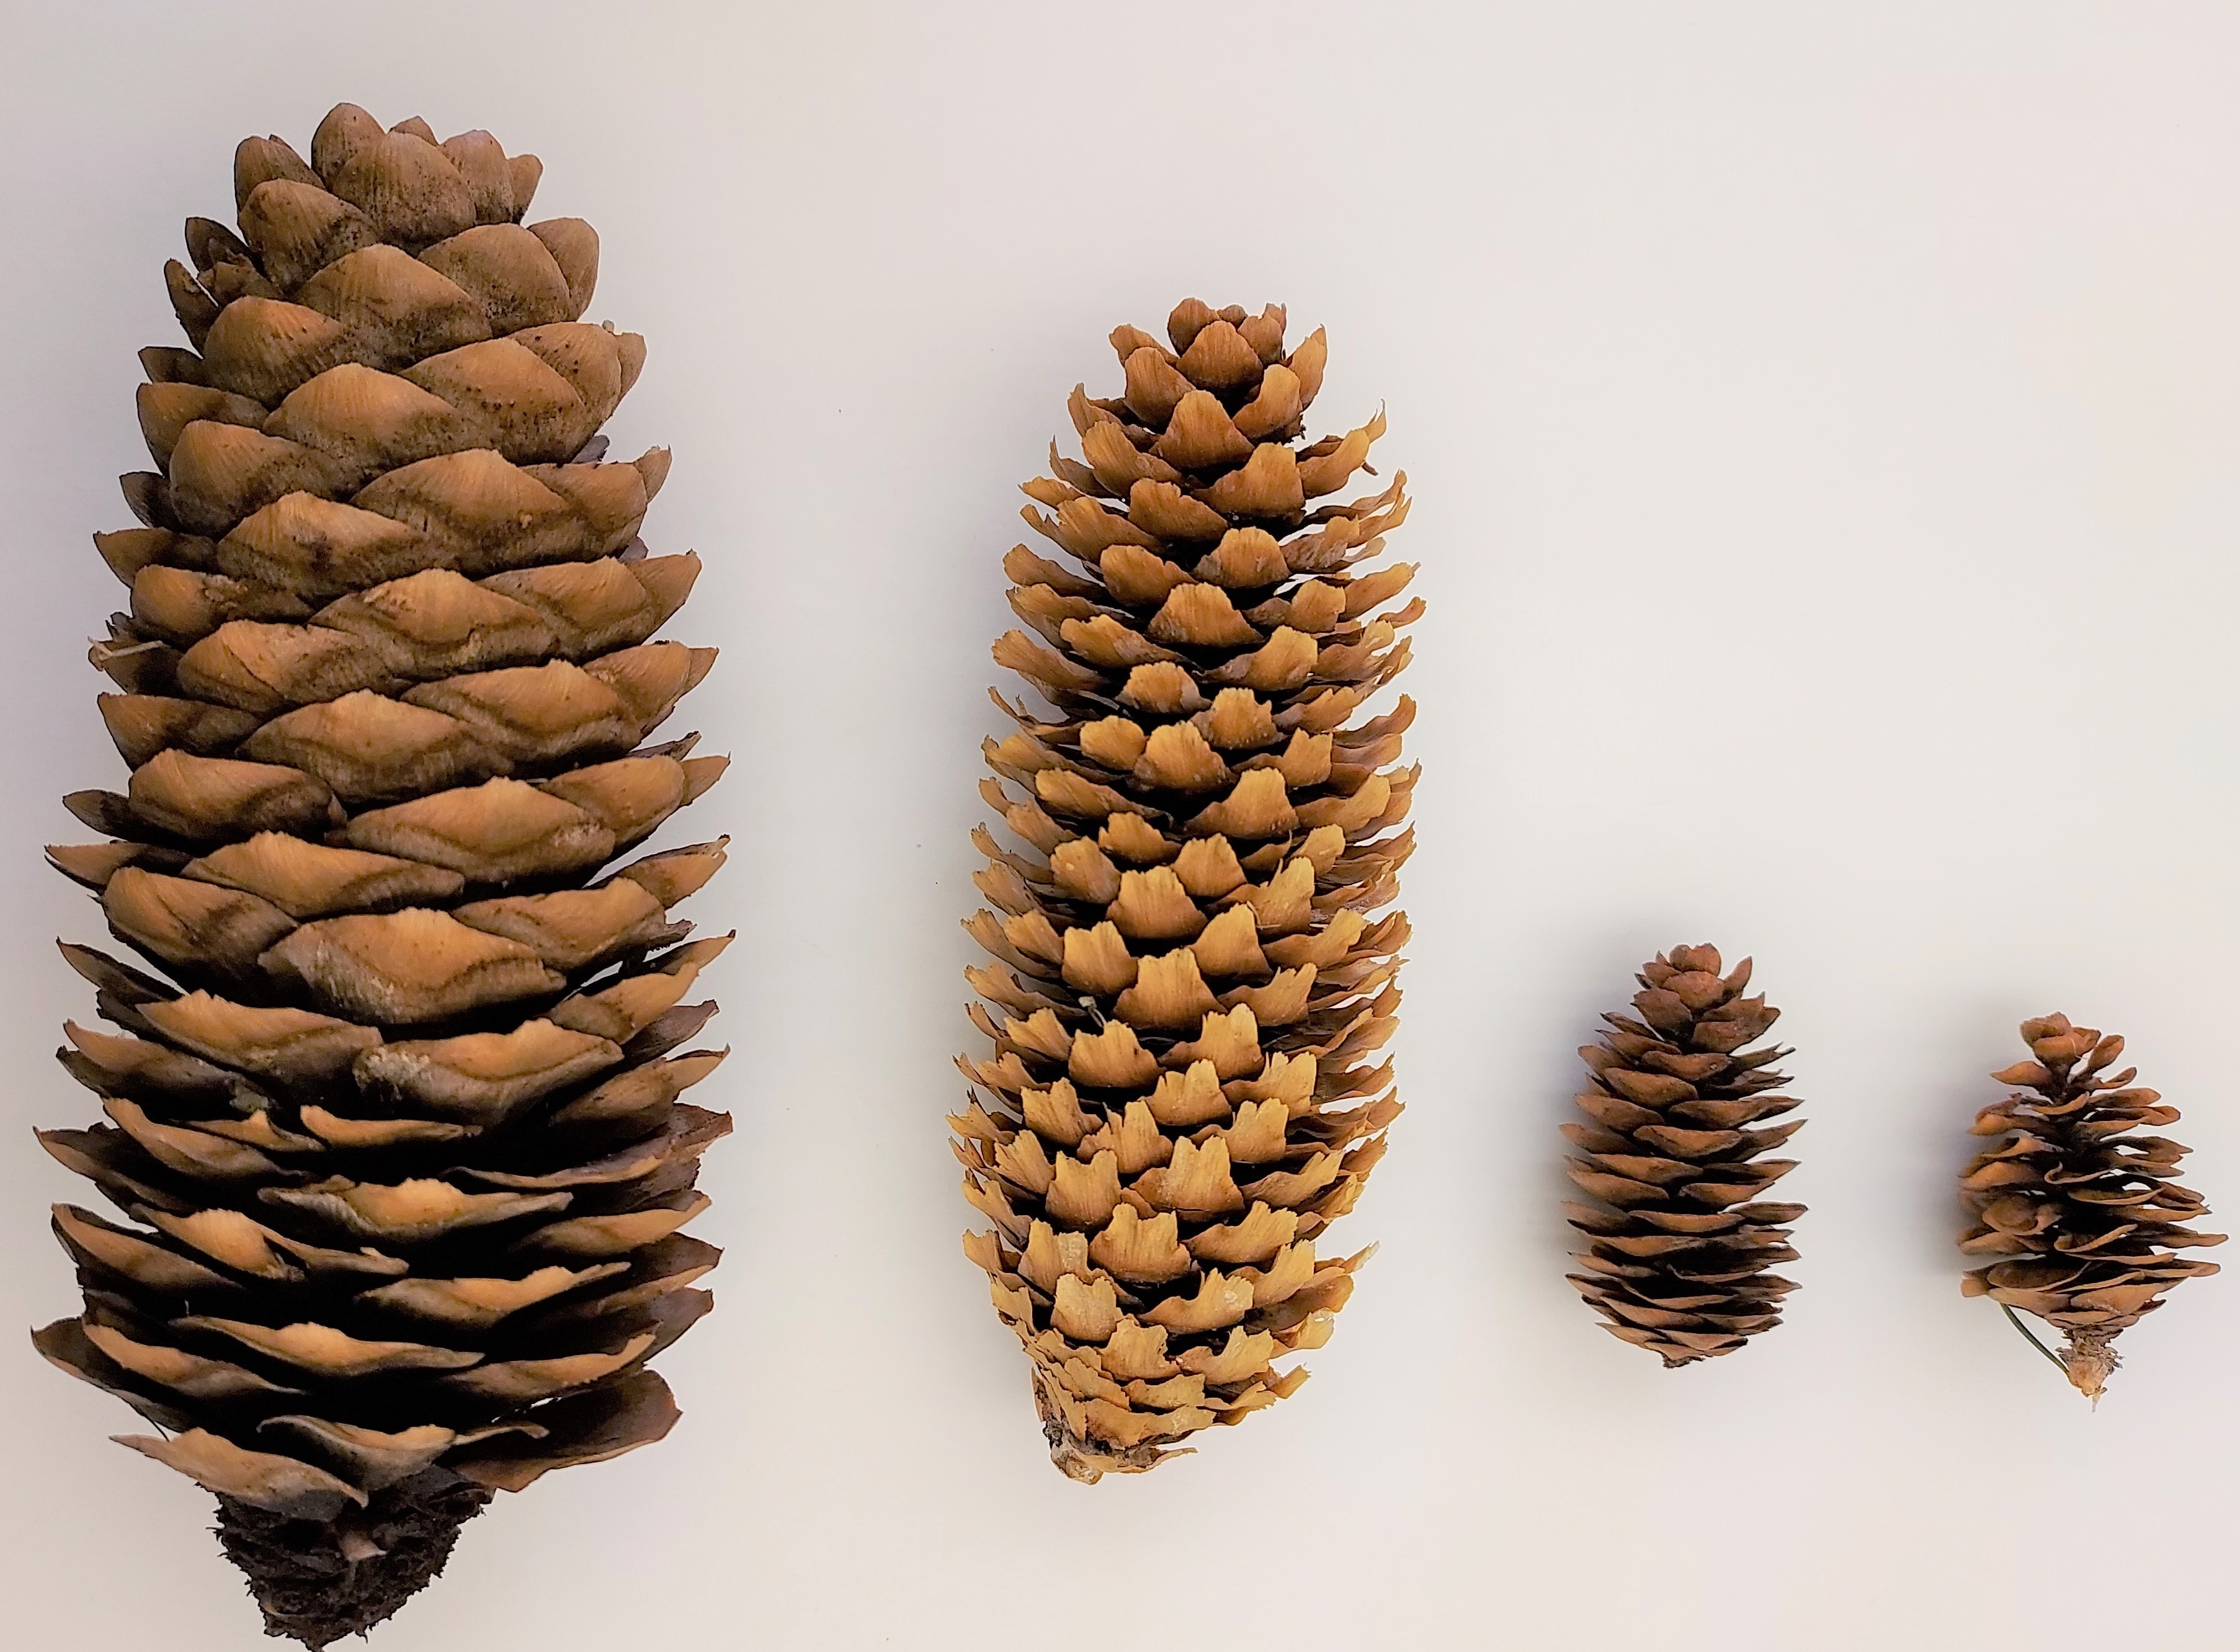 This photo shows Norway, Colorado, Englemann, and white spruce cones lined up next to one another.